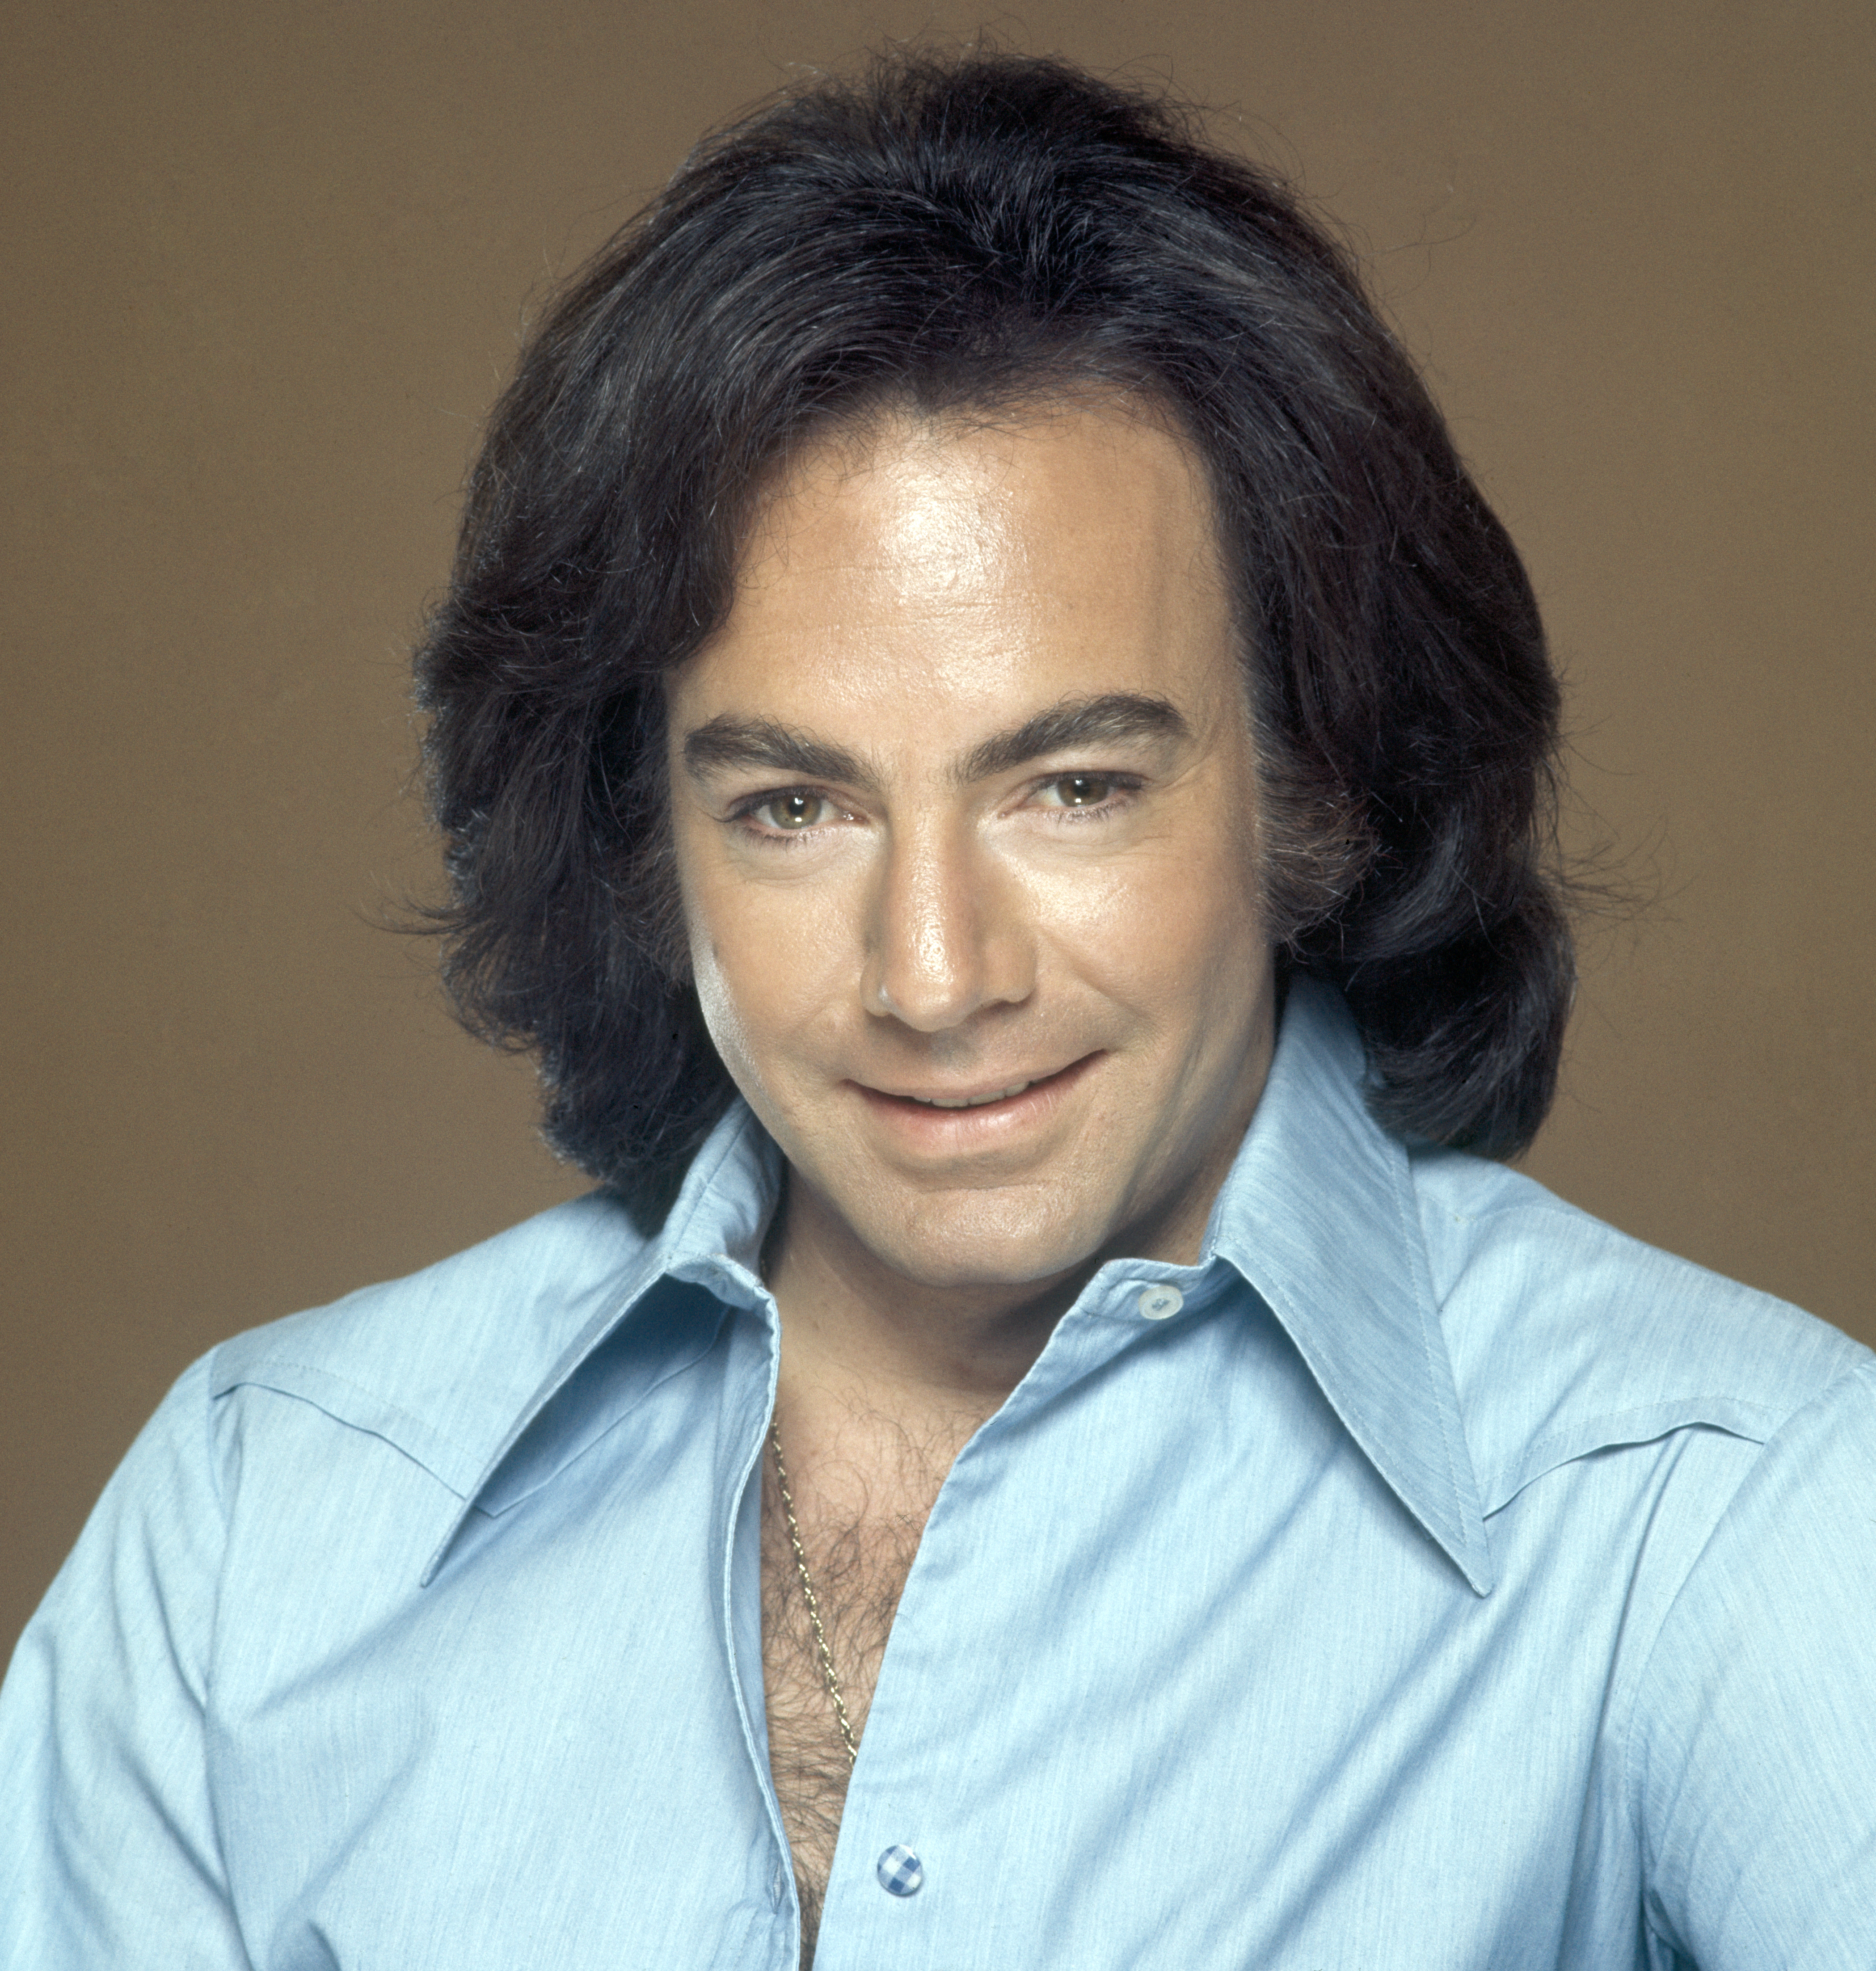 Neil Diamond posing for a portrait in California, 1980 | Source: Getty Images